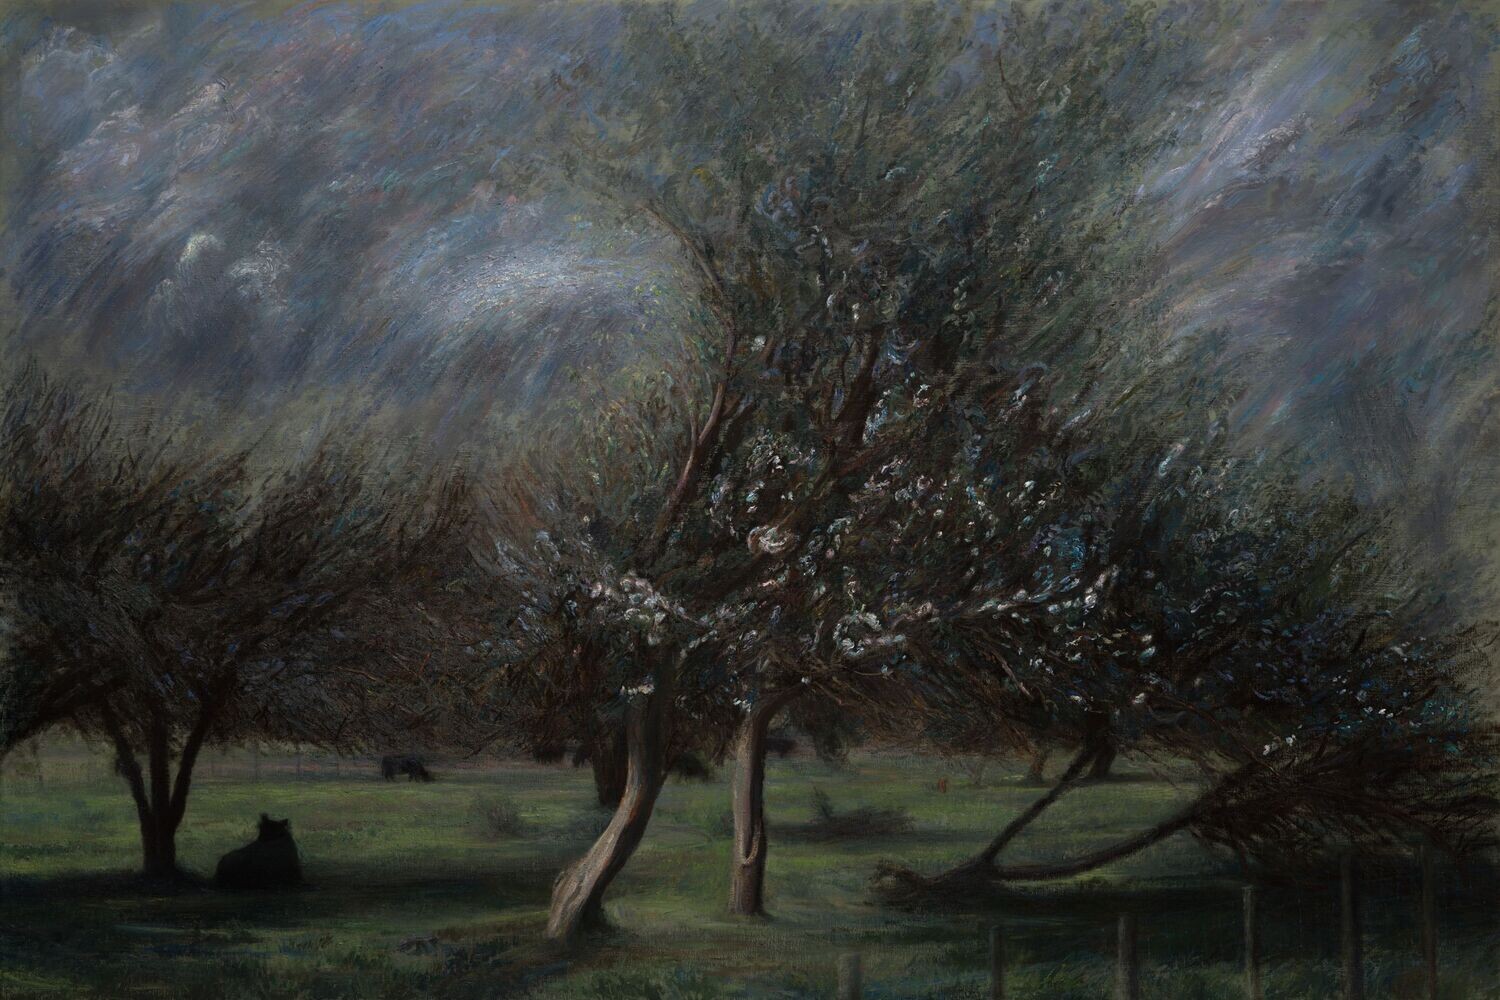 Dark Silhouettes in An Orchard Grove